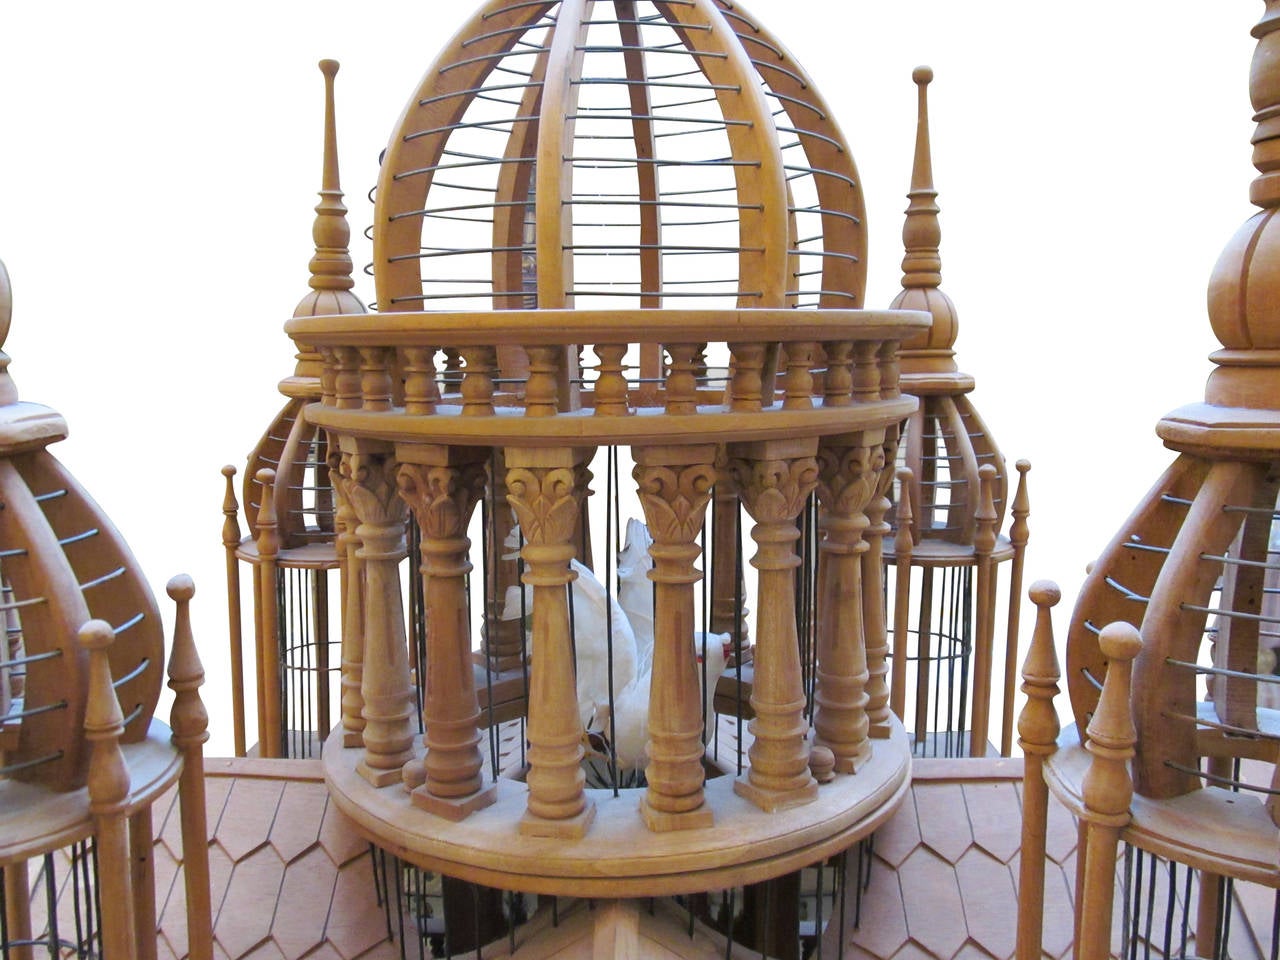 Hand-Crafted 1980s Handmade Wooden Birdhouse with Five Finials and Table